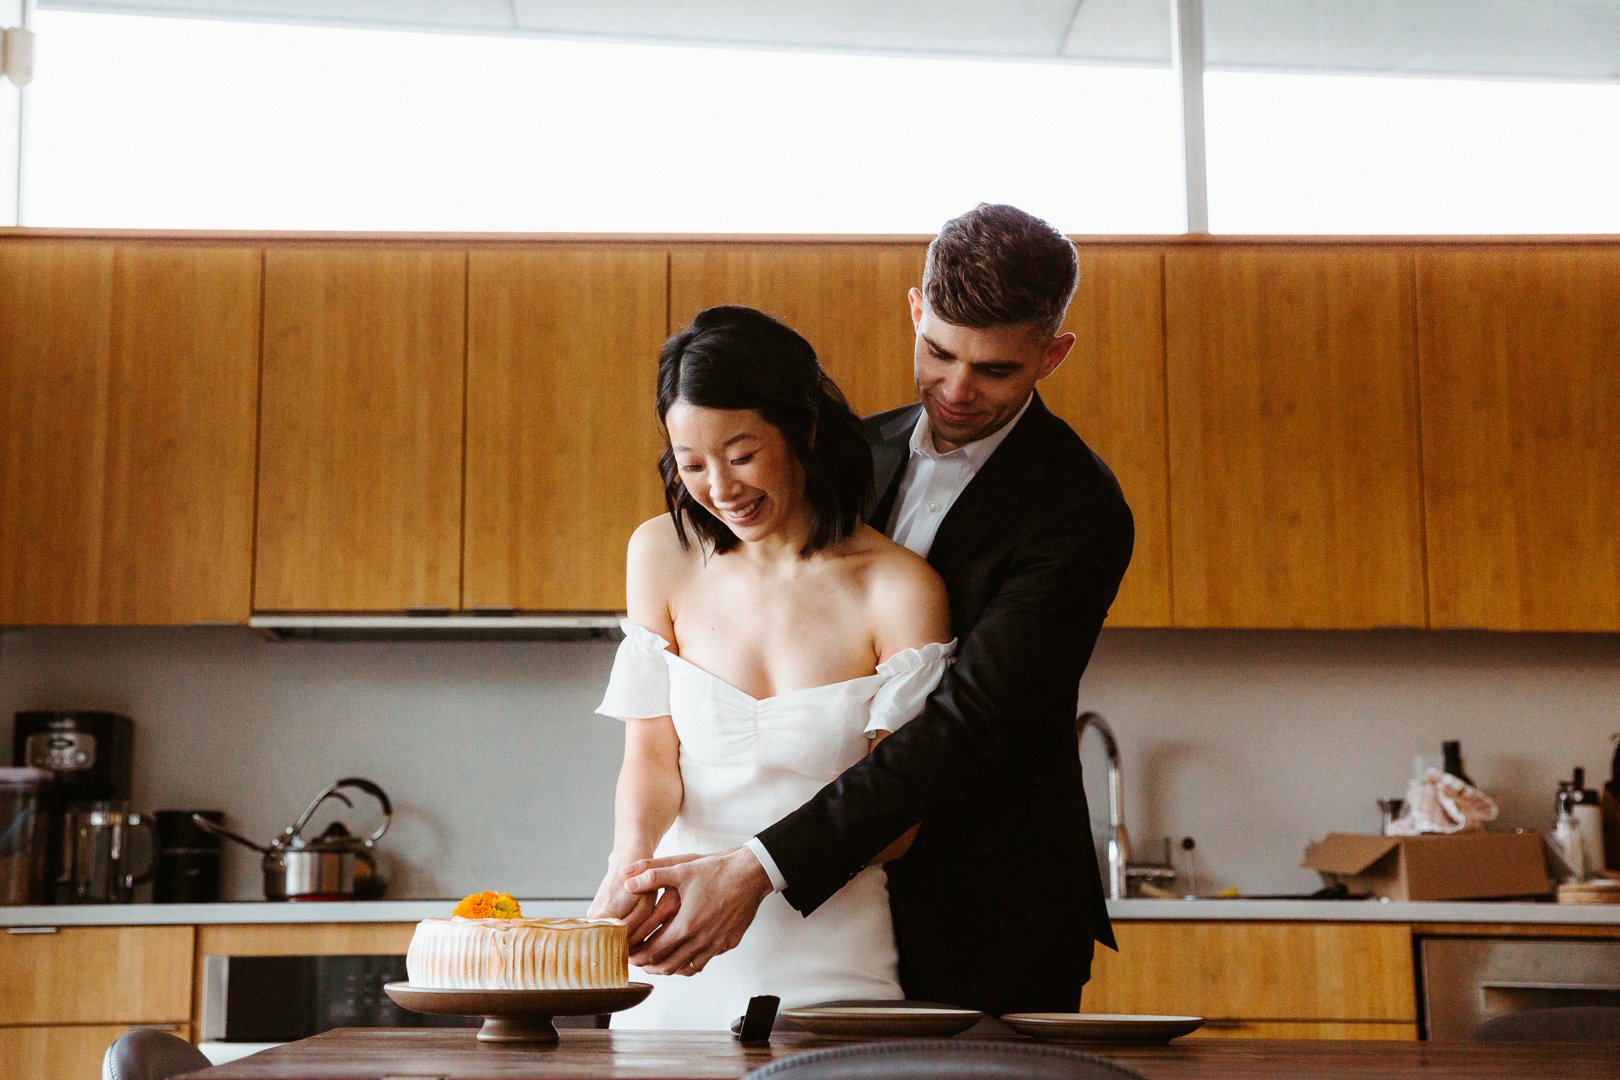 bride and groom cut the cake after their wedding ceremony